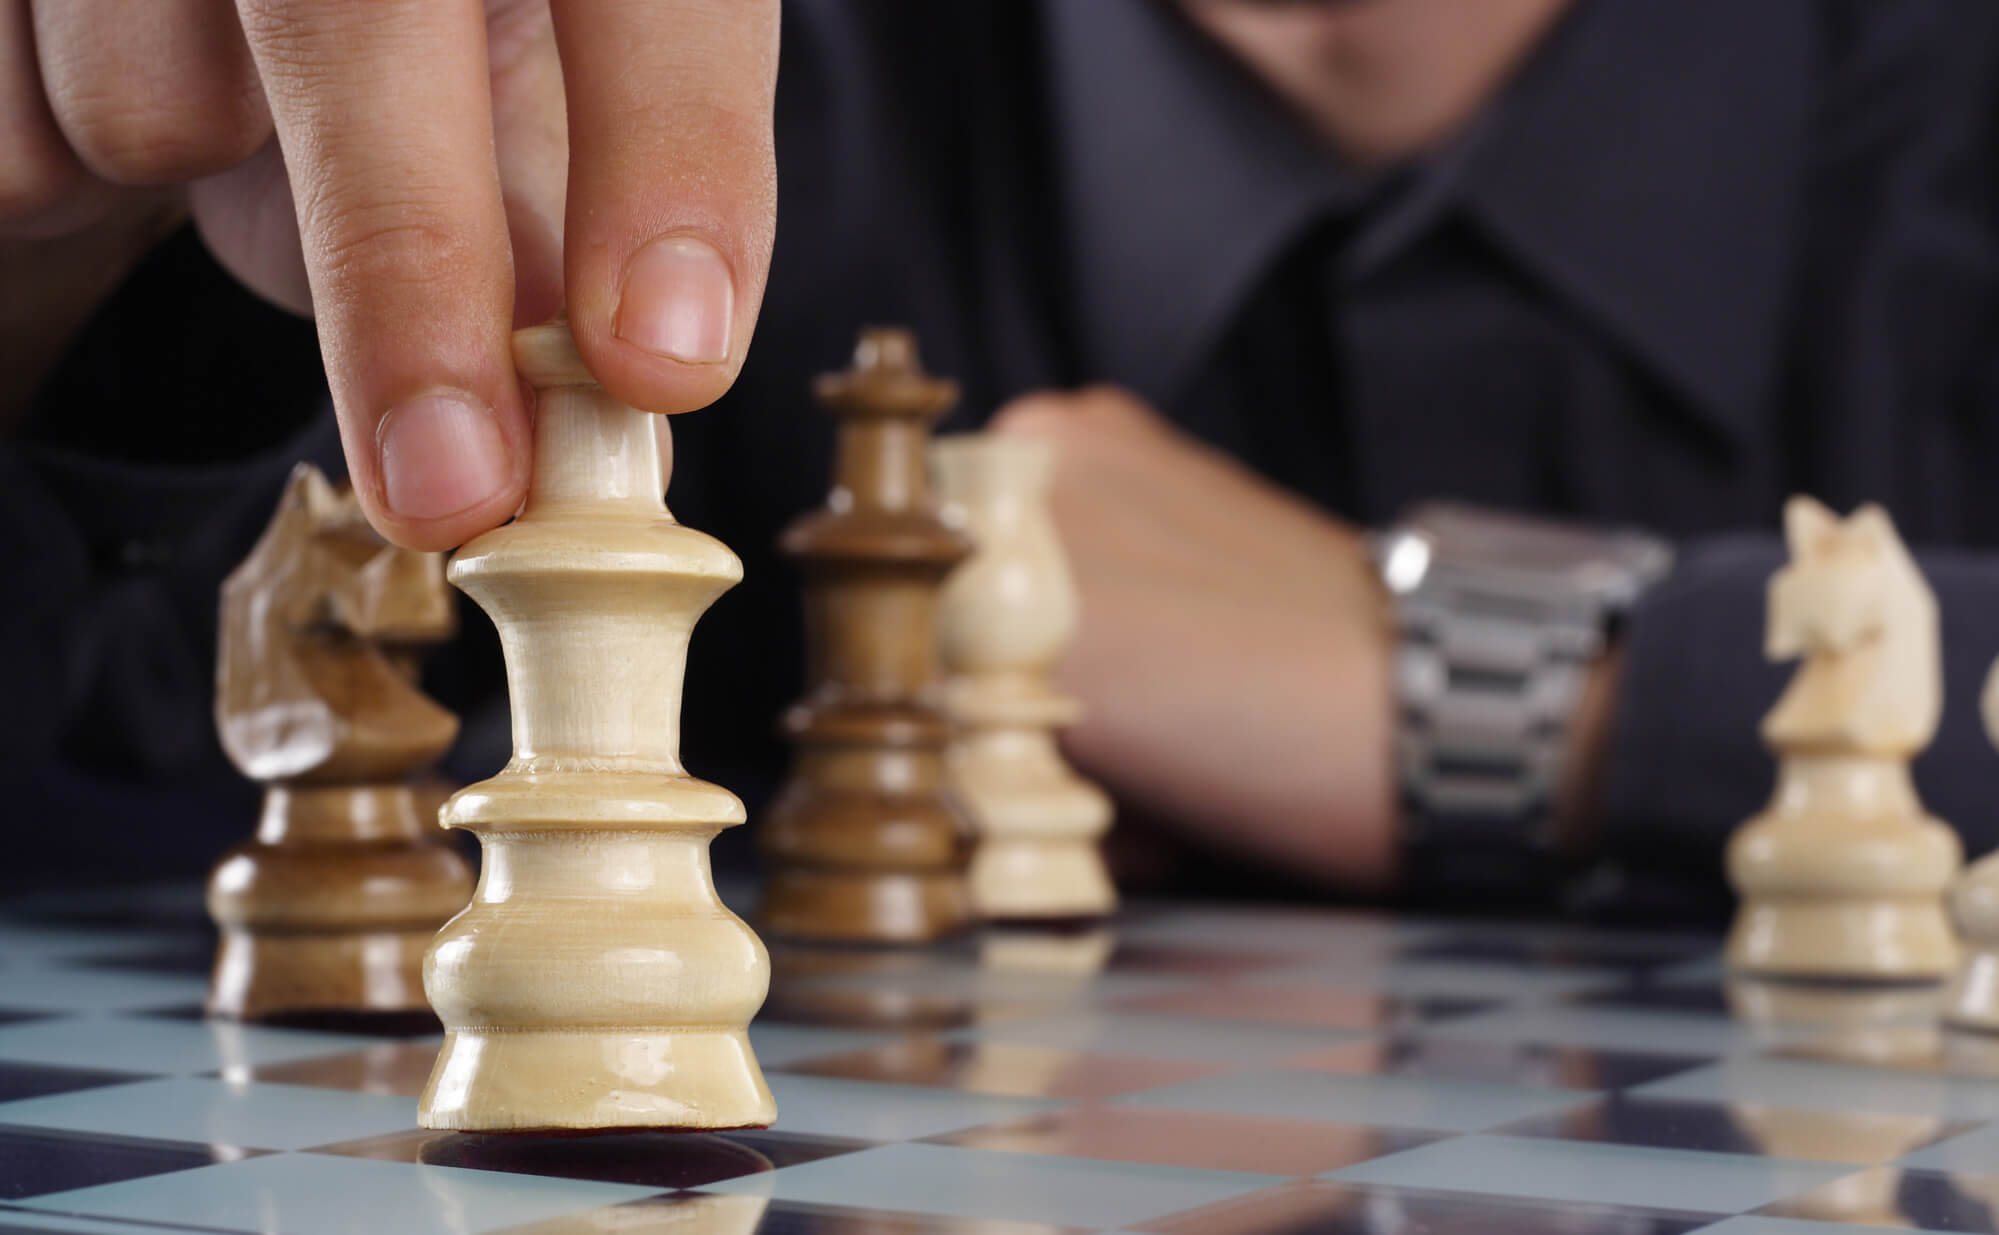 It's International Chess Day. How well do you know the game